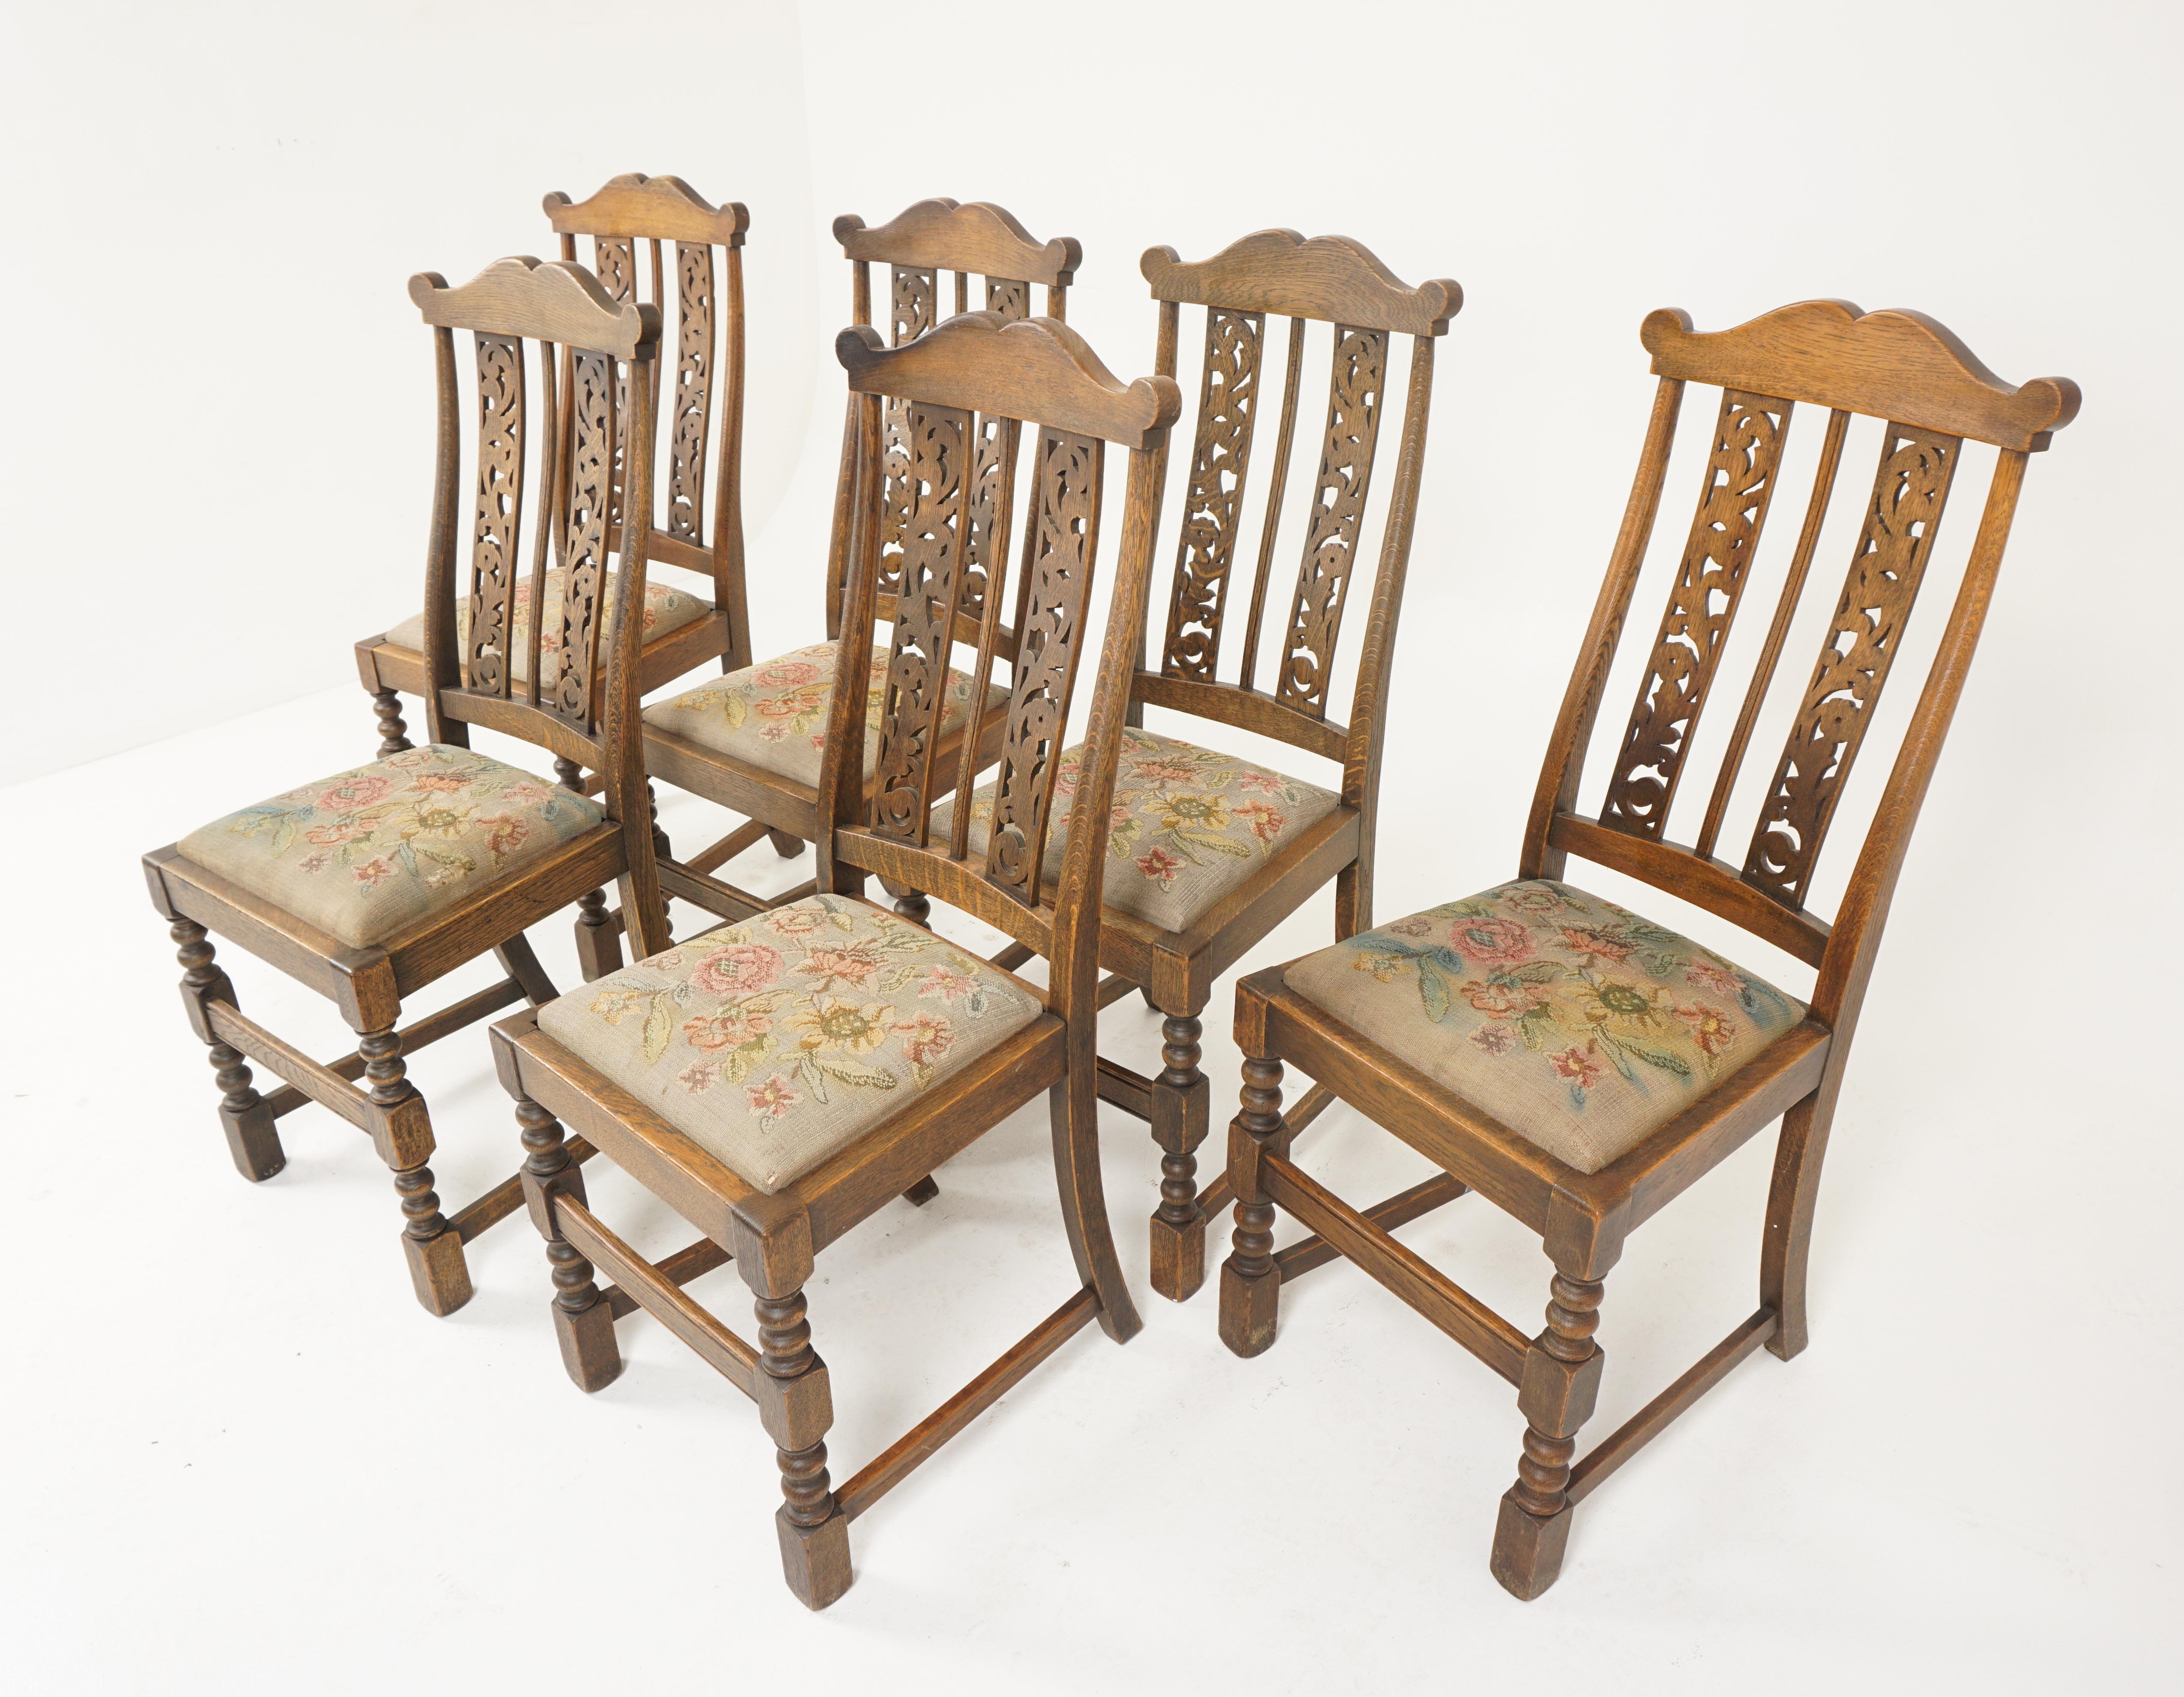 Antique dining chairs, set of 6, oak chairs, Scotland 1920, B2863

Scotland 1920
Solid oak
Original finish
Shaped top rail
Pair of fretwork slats to the shaped back
Lift out seat below
Standing on bobbin front legs with three stretchers